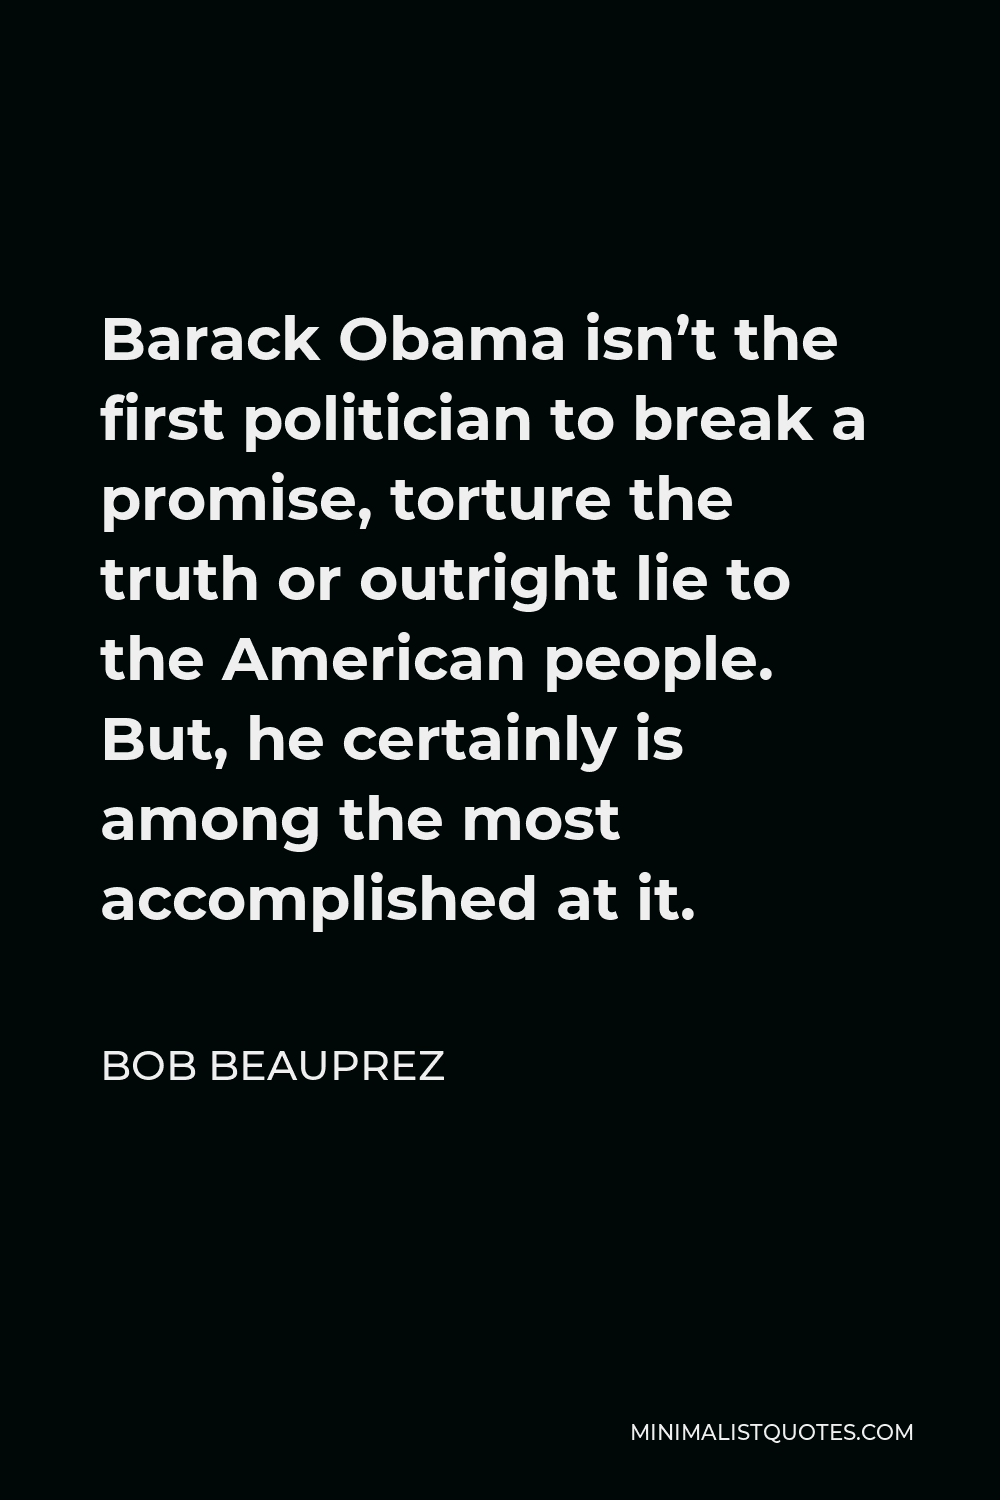 Bob Beauprez Quote - Barack Obama isn’t the first politician to break a promise, torture the truth or outright lie to the American people. But, he certainly is among the most accomplished at it.